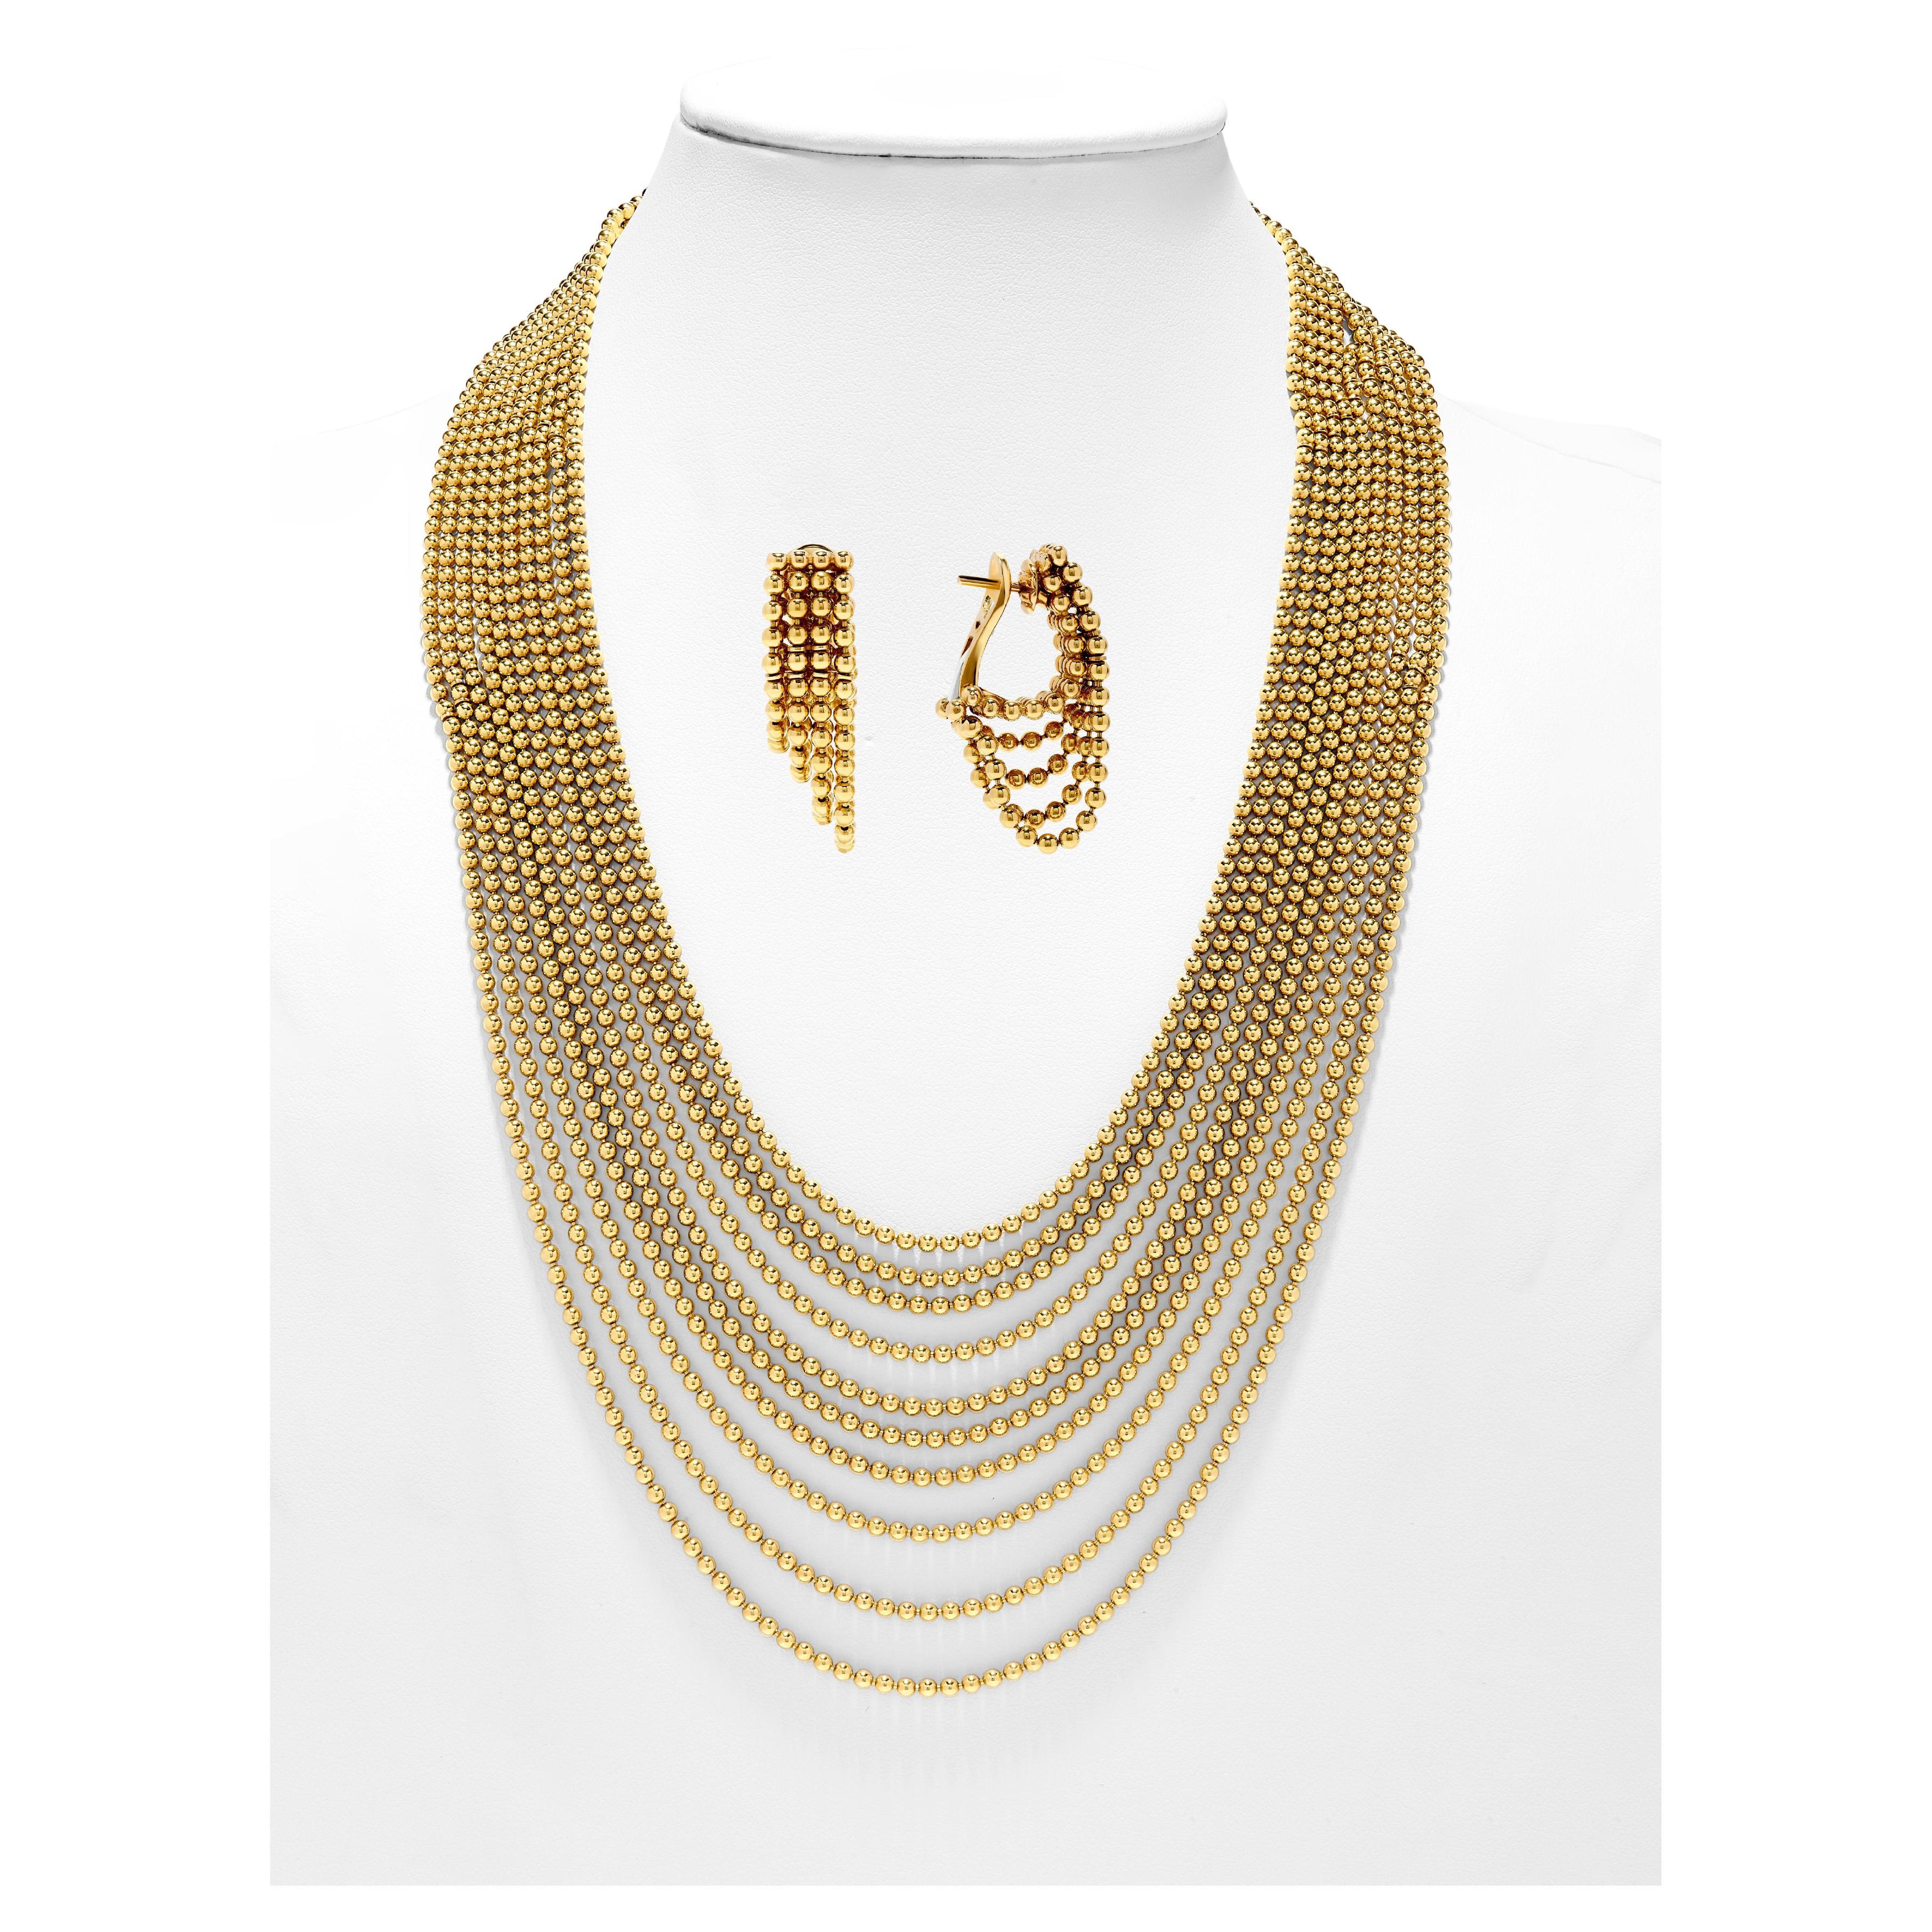 Cartier "Draperie Collection" Demiparure Yellow Gold Necklace - Earrings For Sale